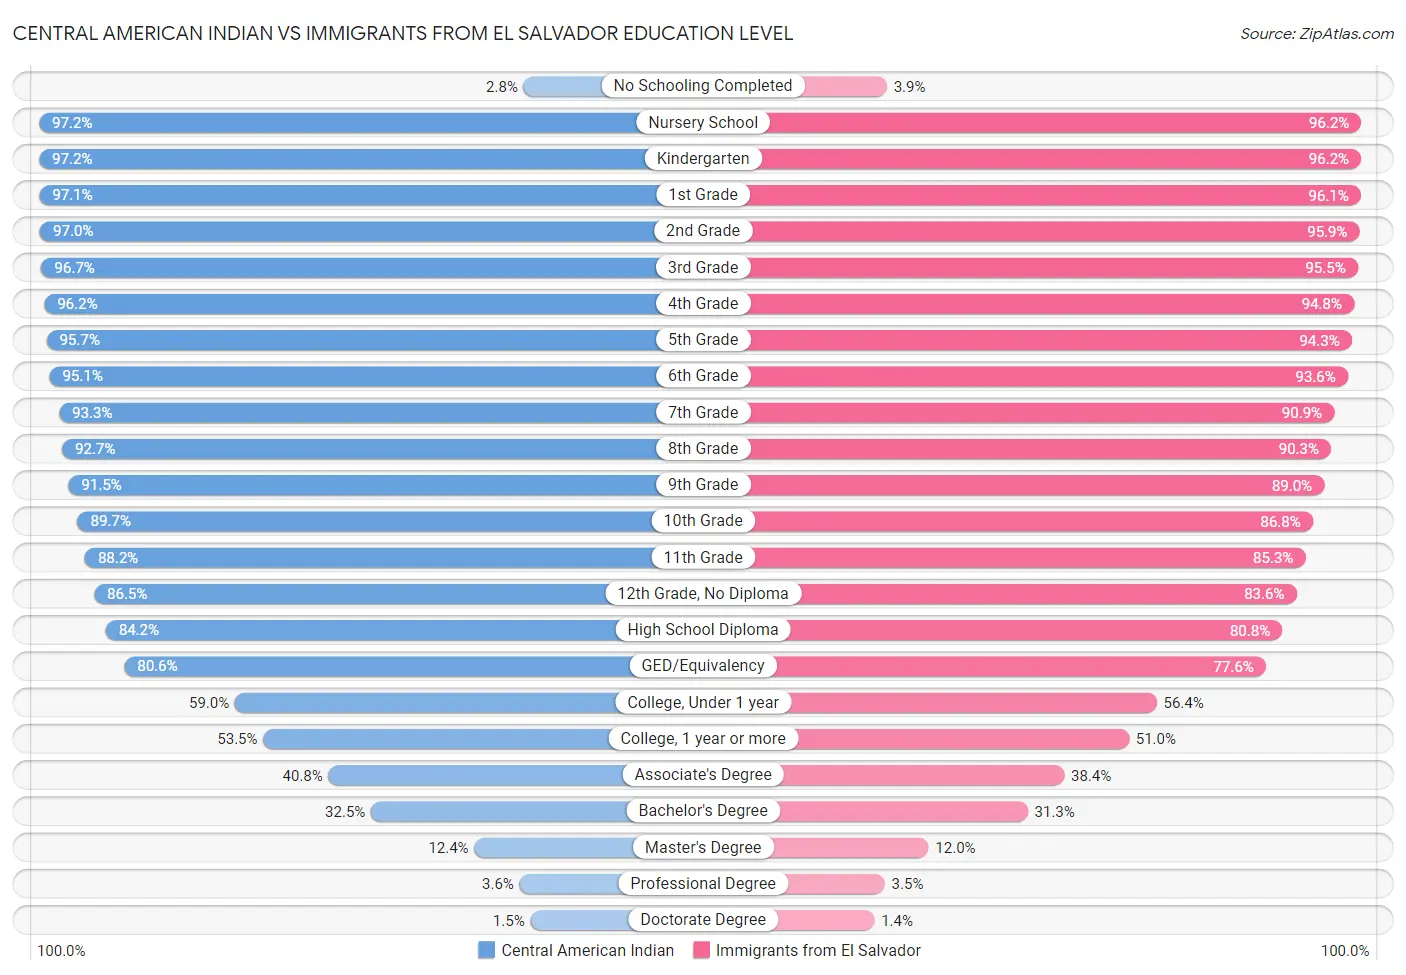 Central American Indian vs Immigrants from El Salvador Education Level